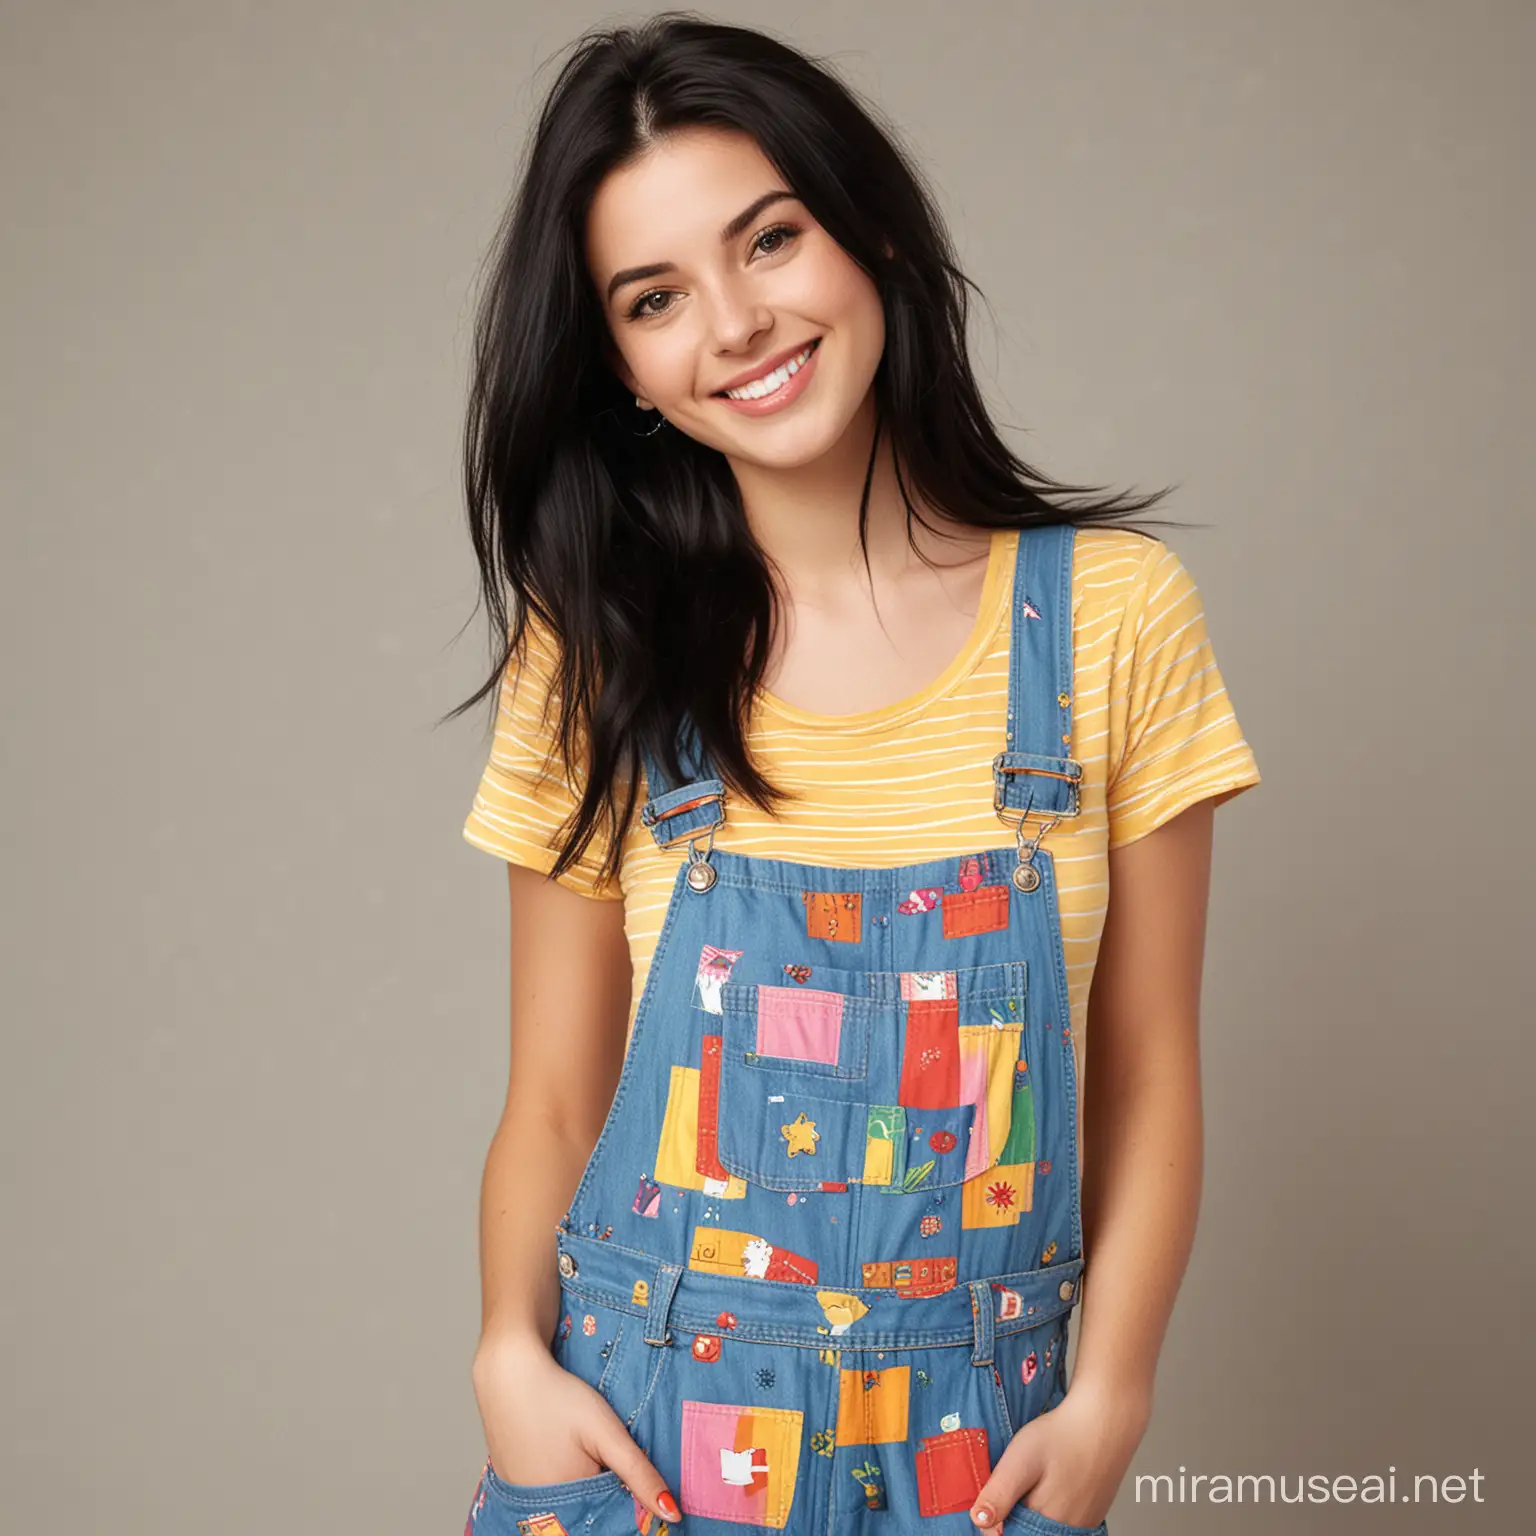 a 20-year-old white woman, with a cute face, with long, straight black hair, smiling, wearing colorful overalls